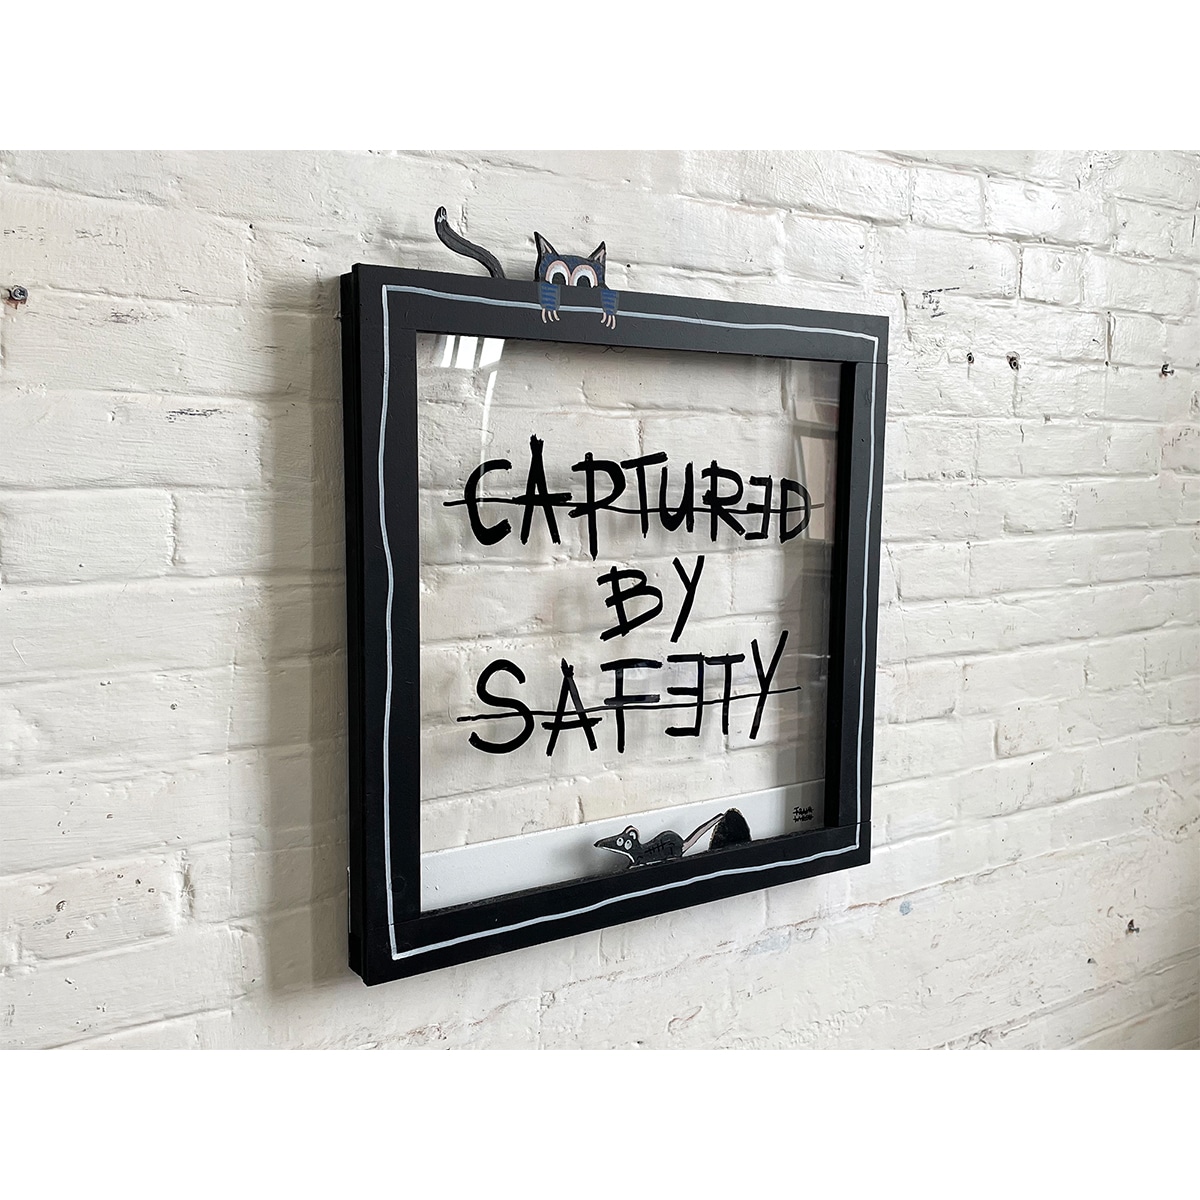 CAPTURED BY SAFETY #2